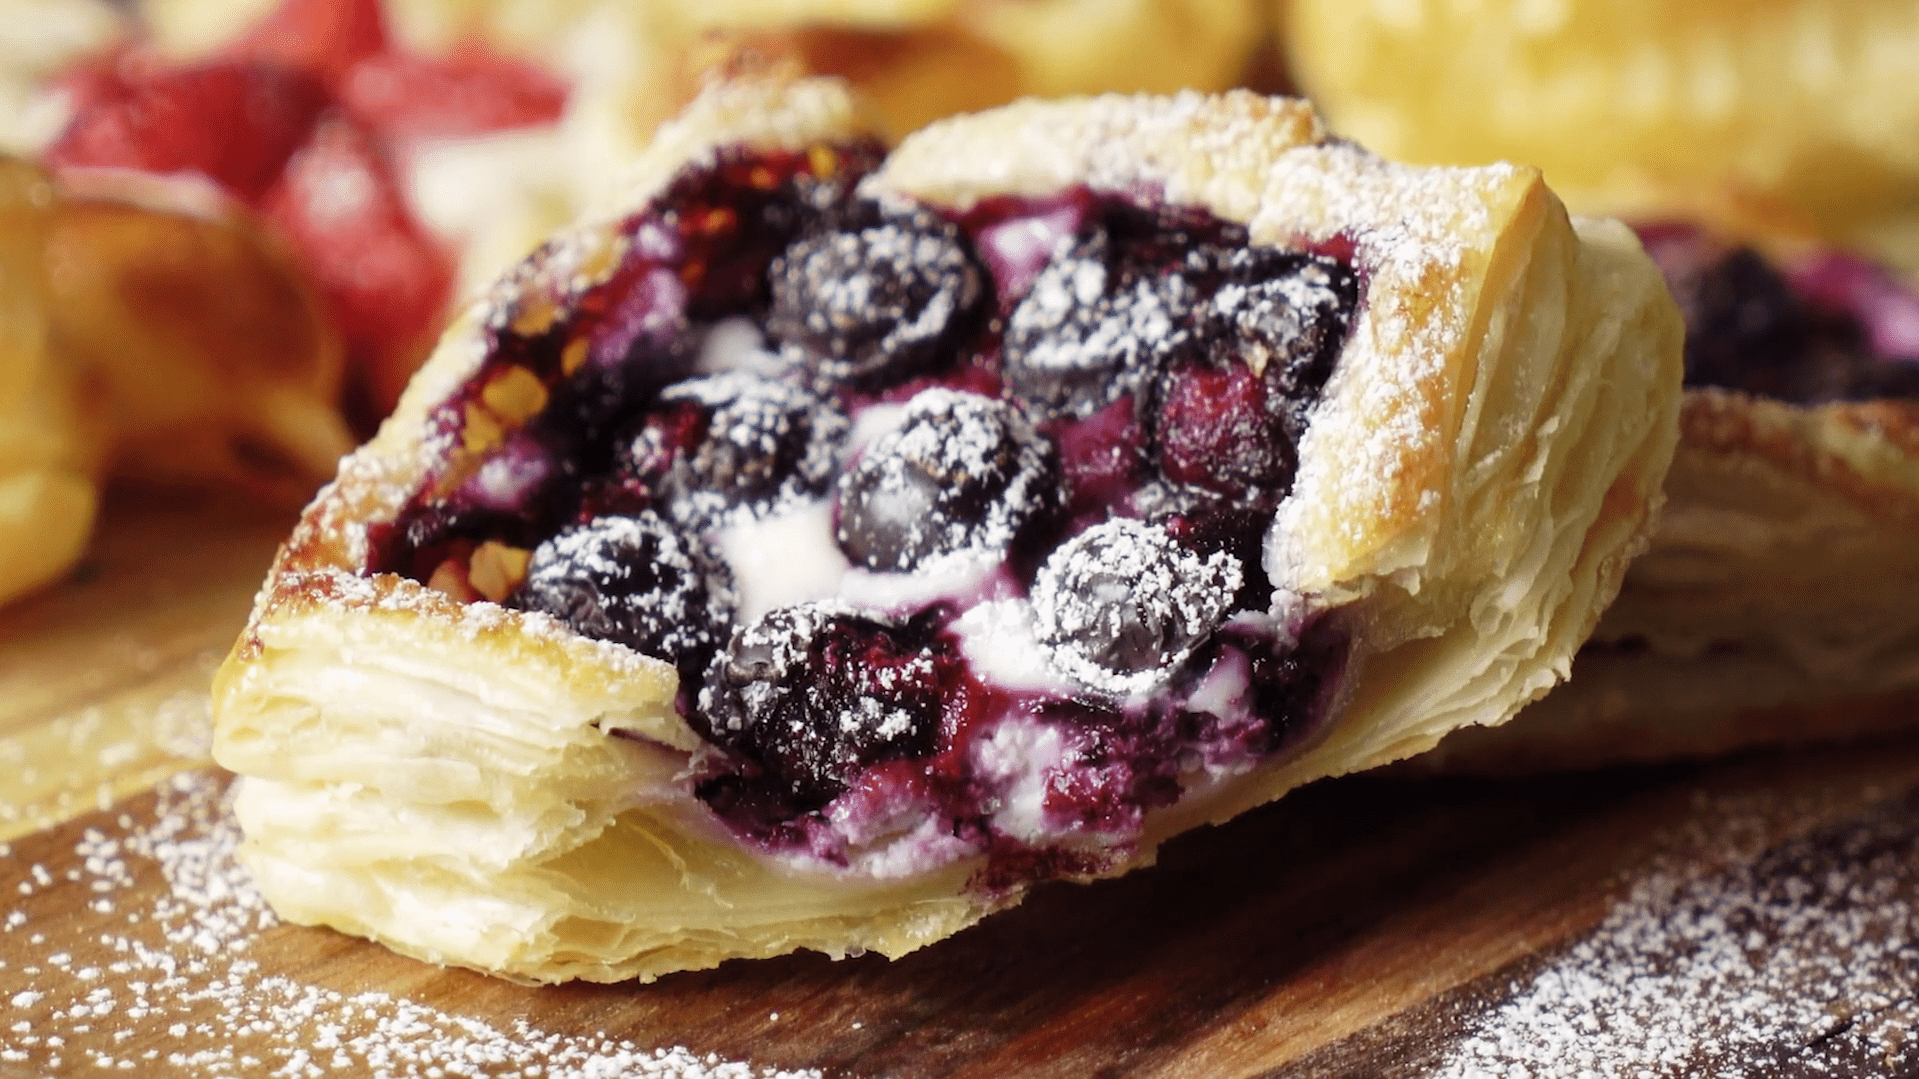 Blueberry Puff Pastry - Pies and Tacos